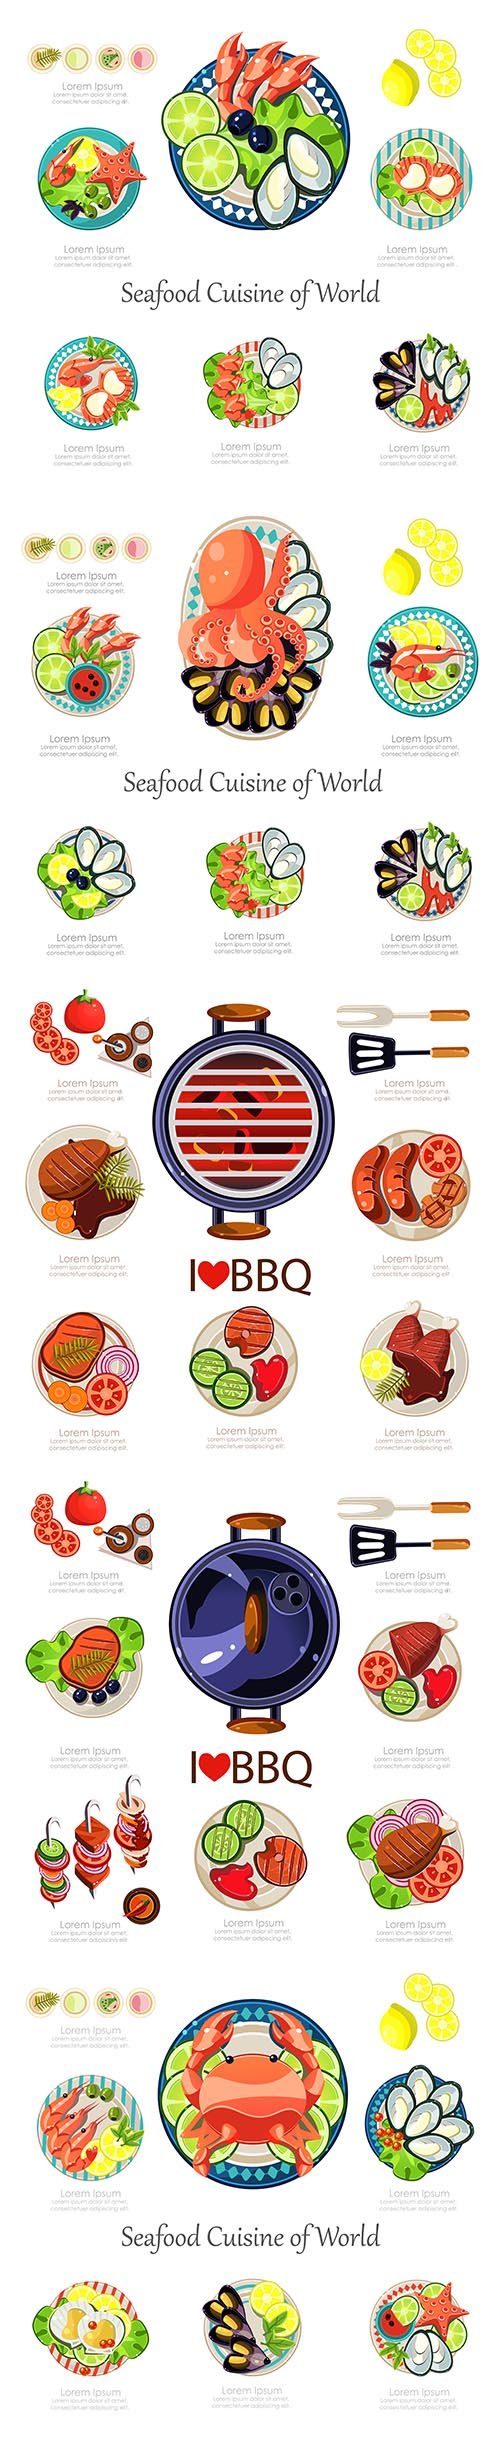 BBQ and Seafood Design Infographic Set